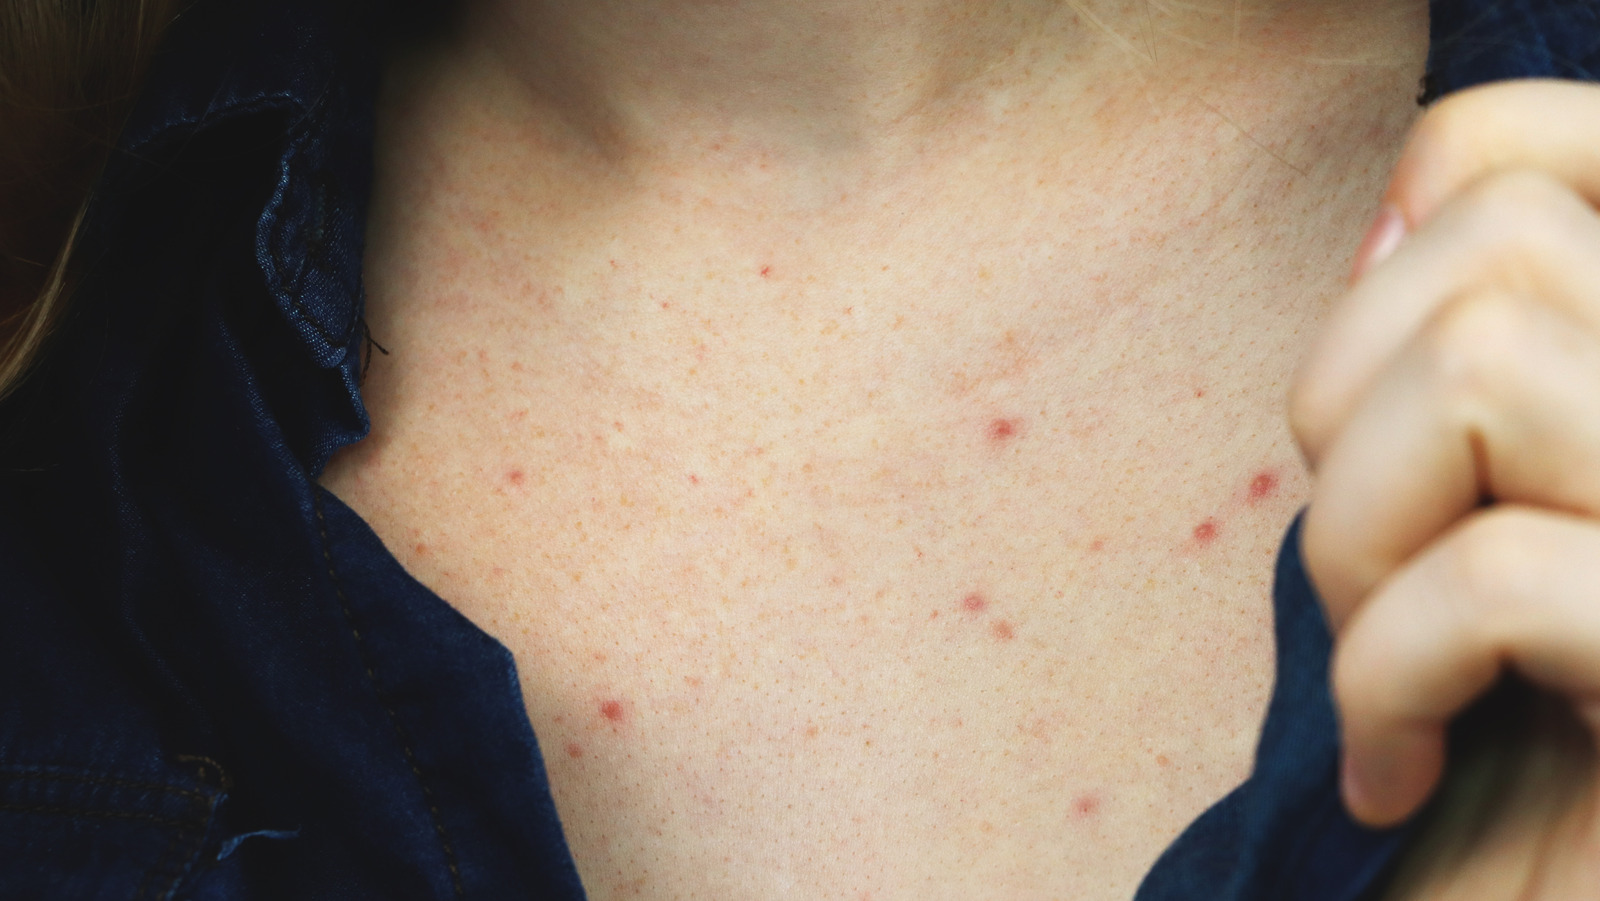 What Are Sweat Pimples And How Do You Treat Them?